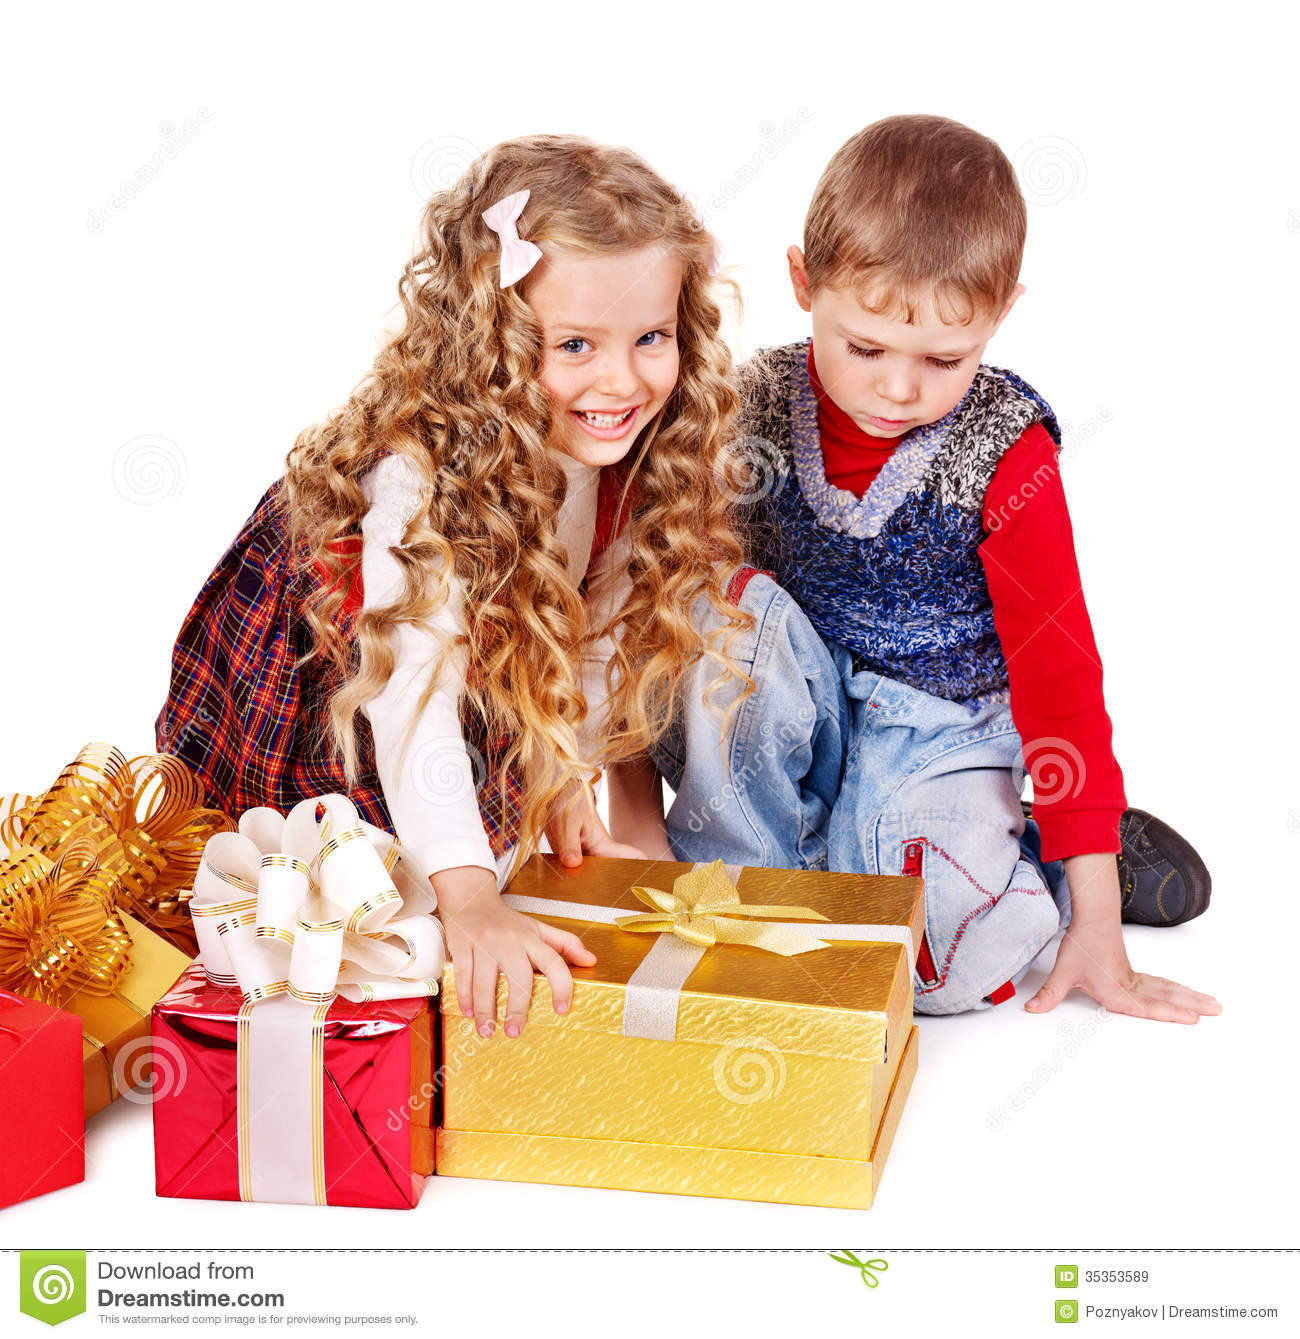 Children Are Gifts
 Kids With Christmas Gift Box Royalty Free Stock